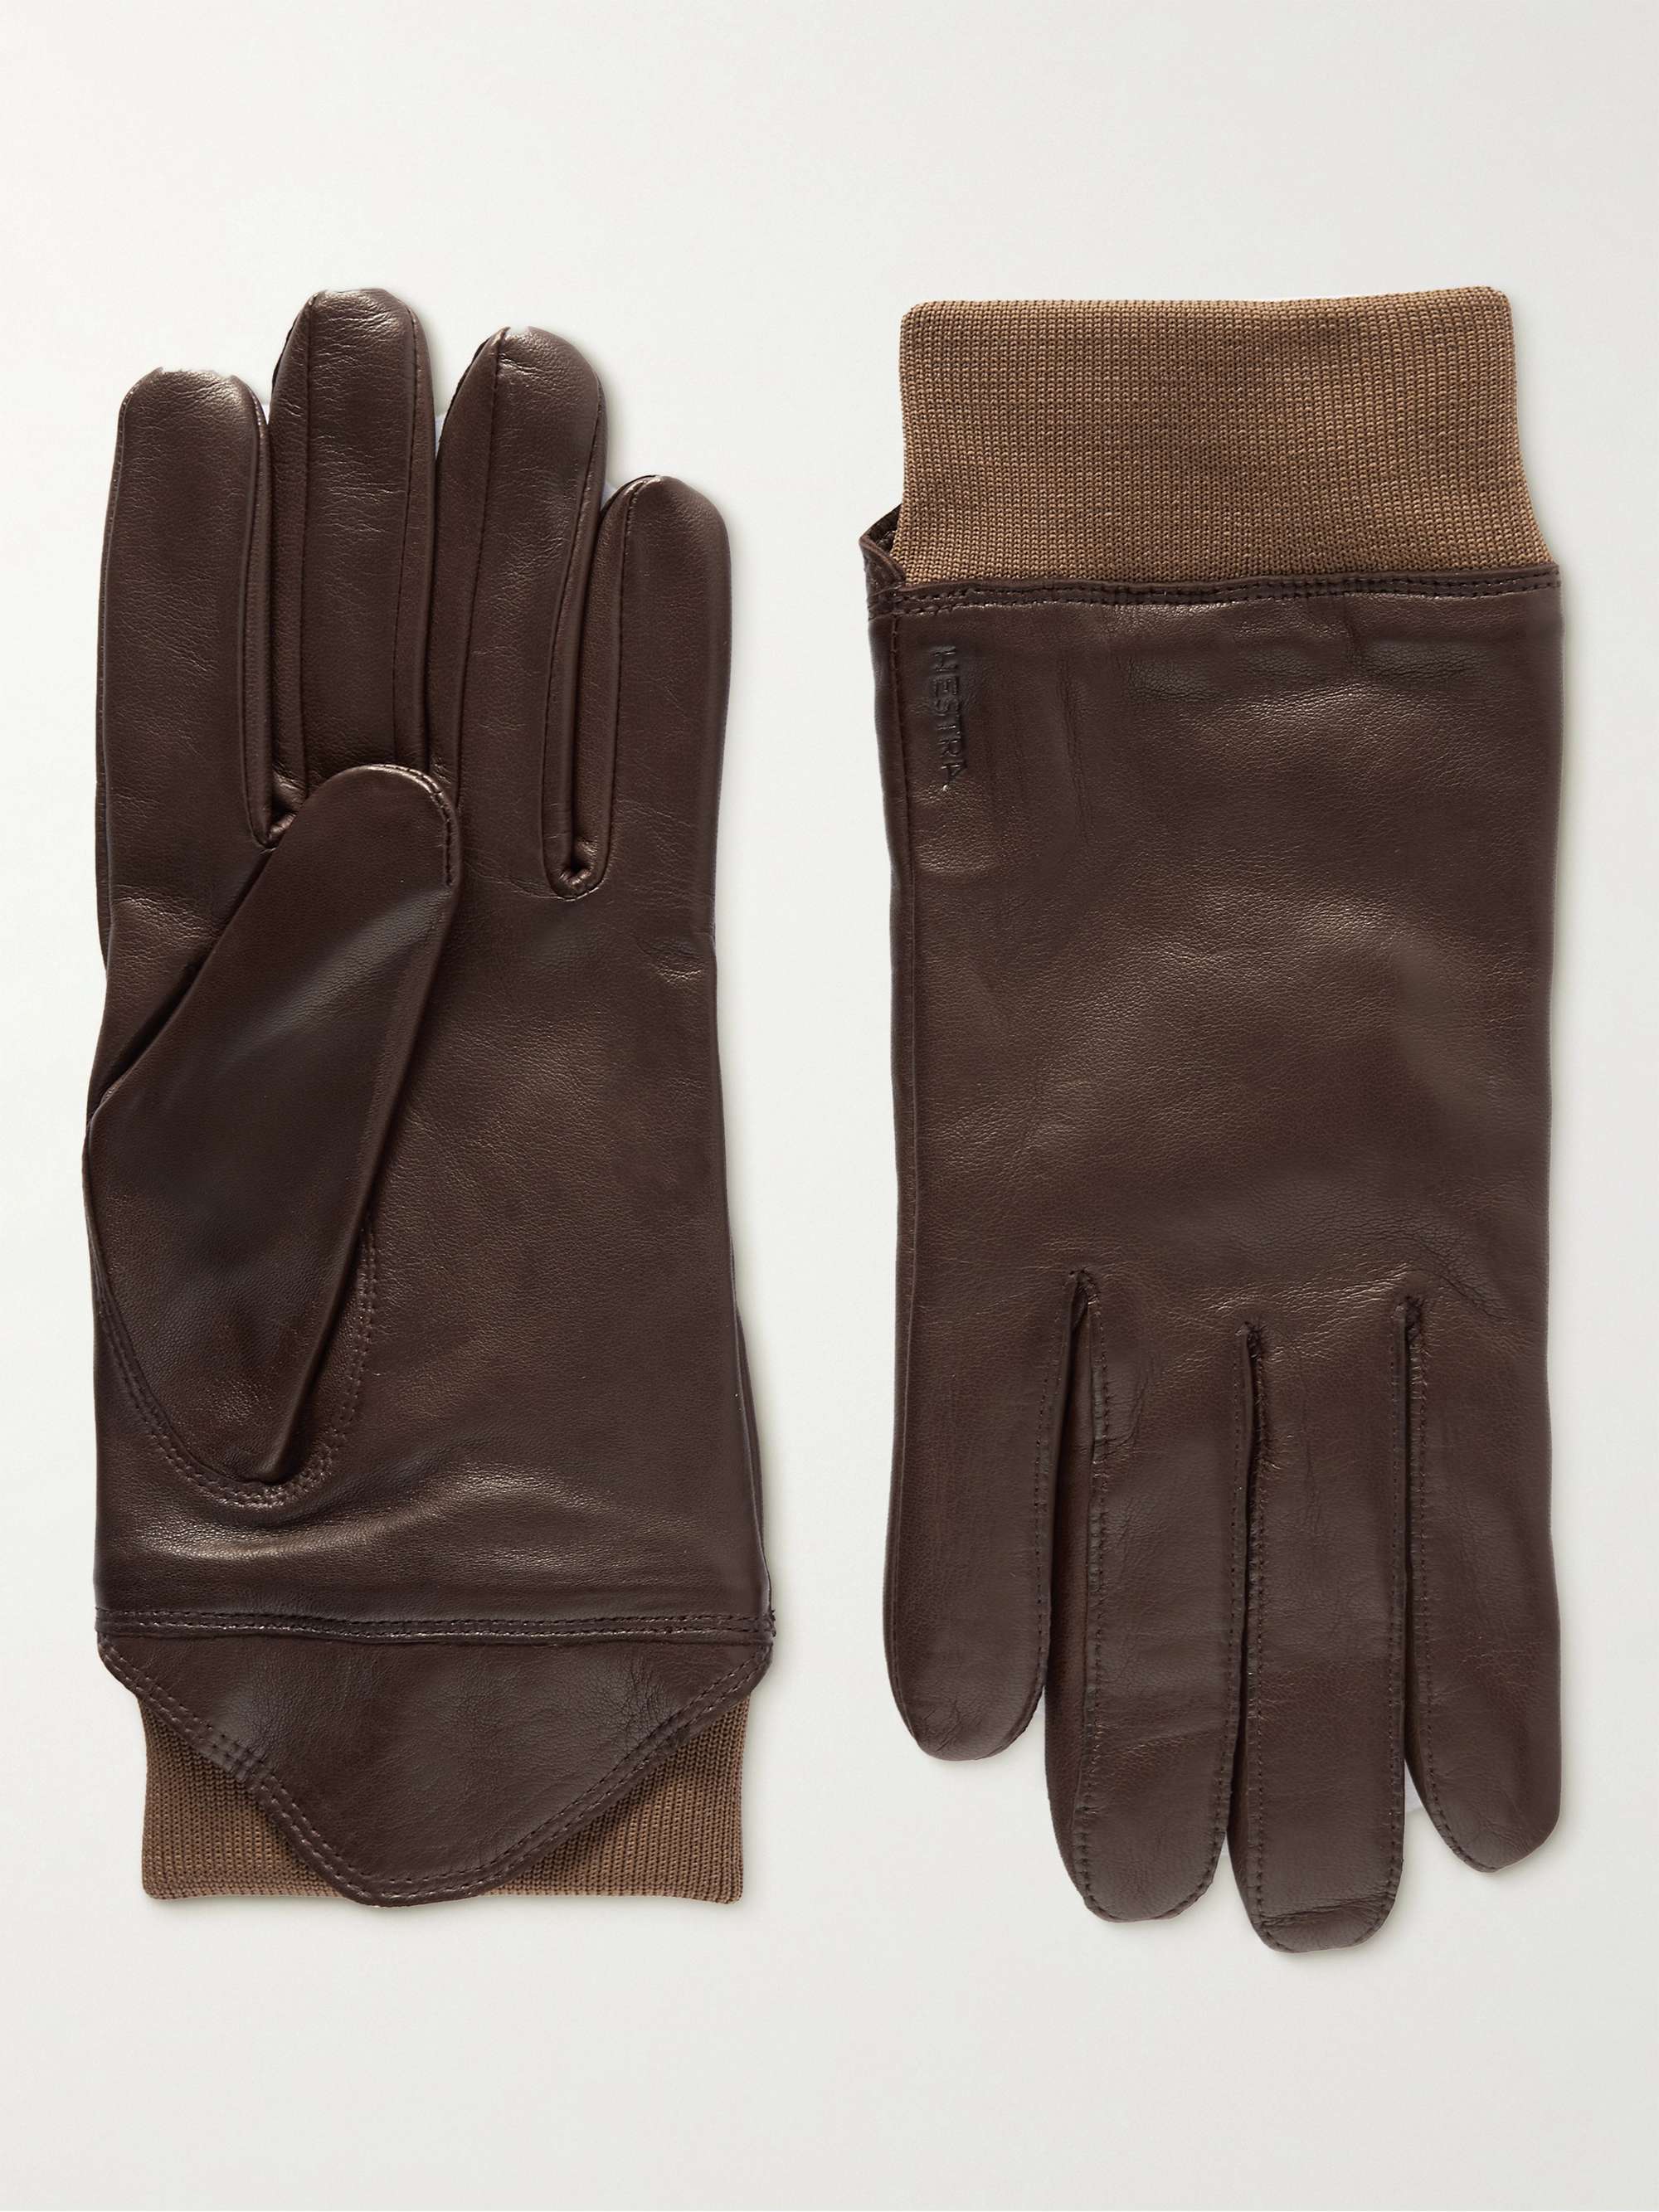 HESTRA Adrian Leather and Wool-Blend Gloves